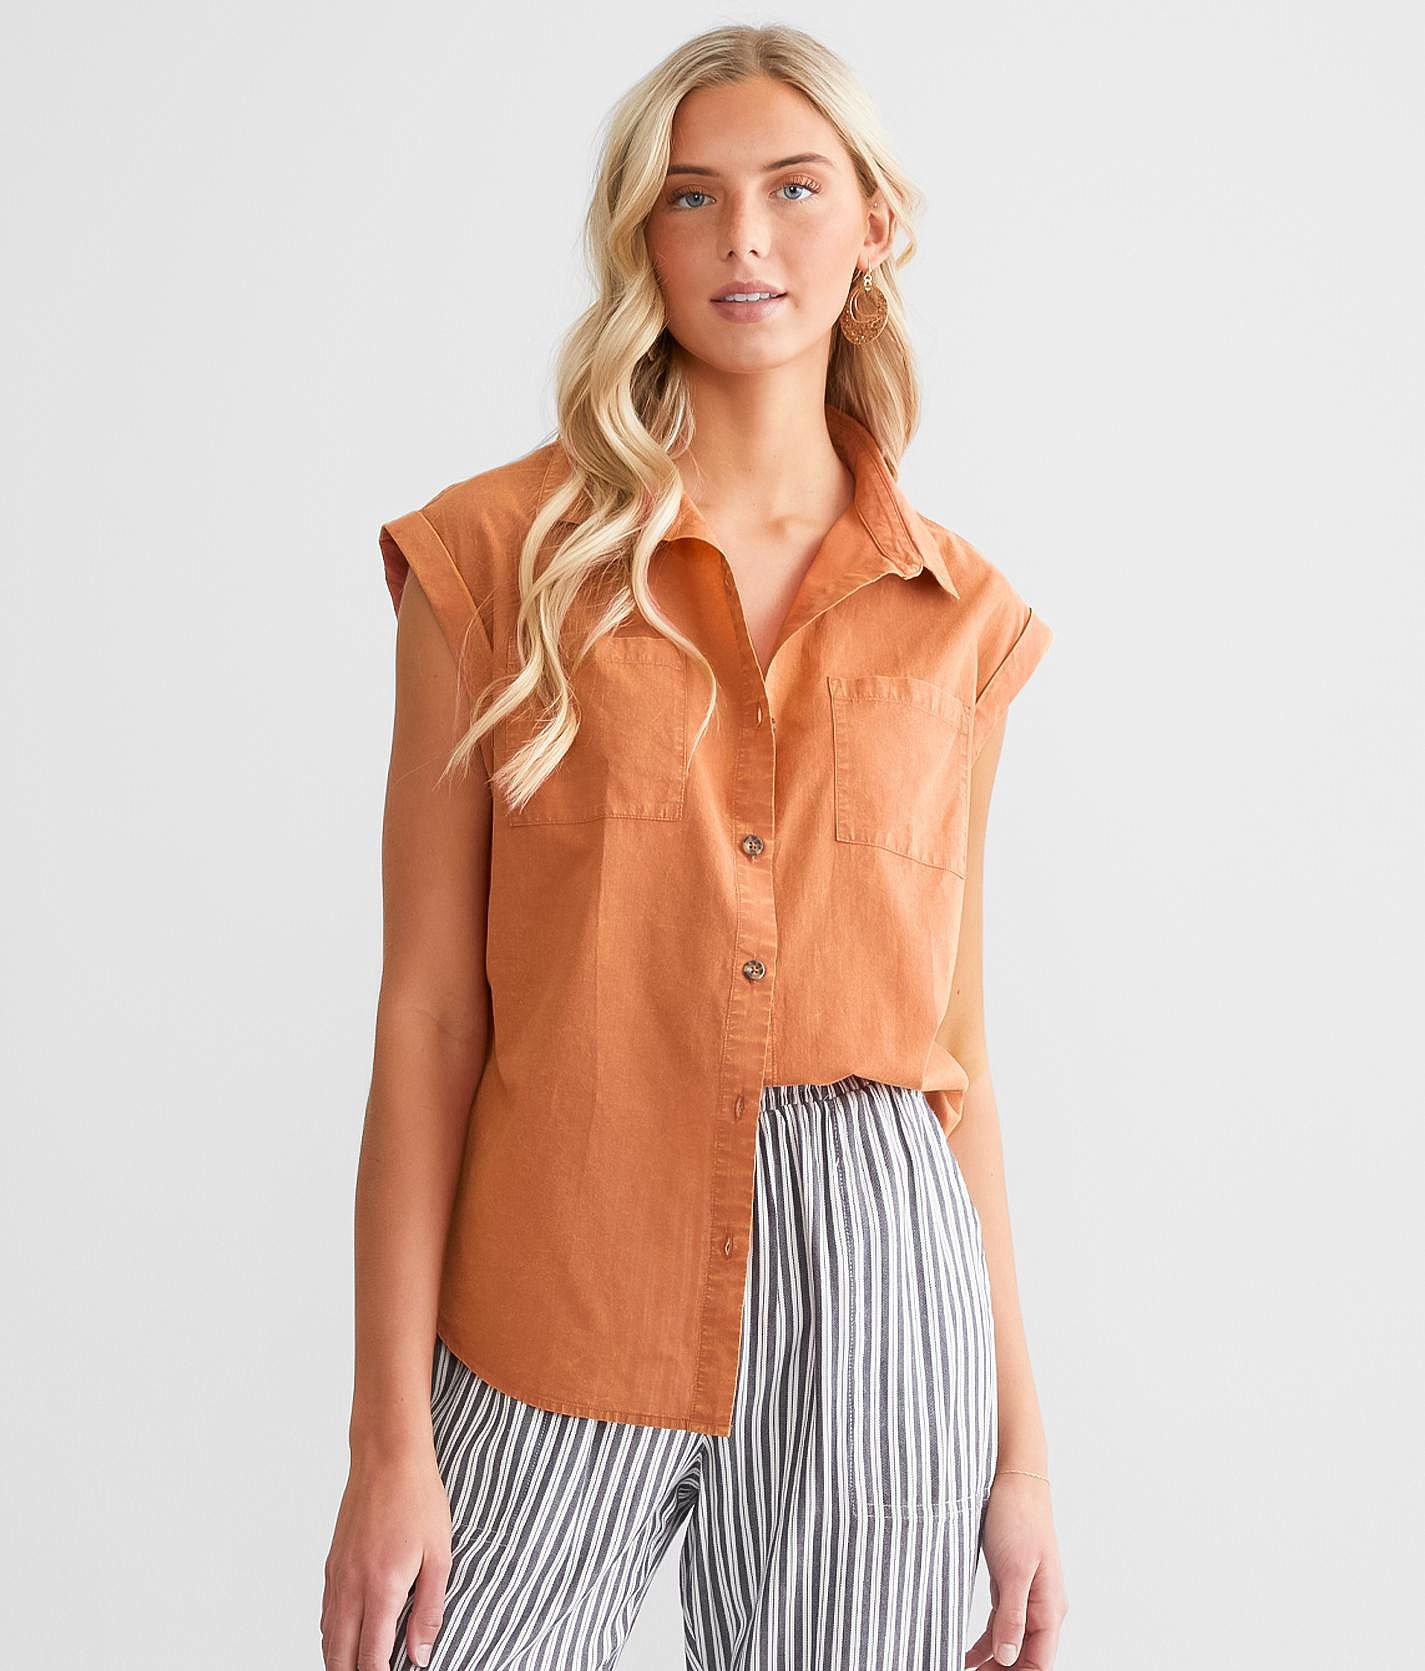 MNK Woven Washed Shirt - Women's Shirts/Blouses in Apricot Tan